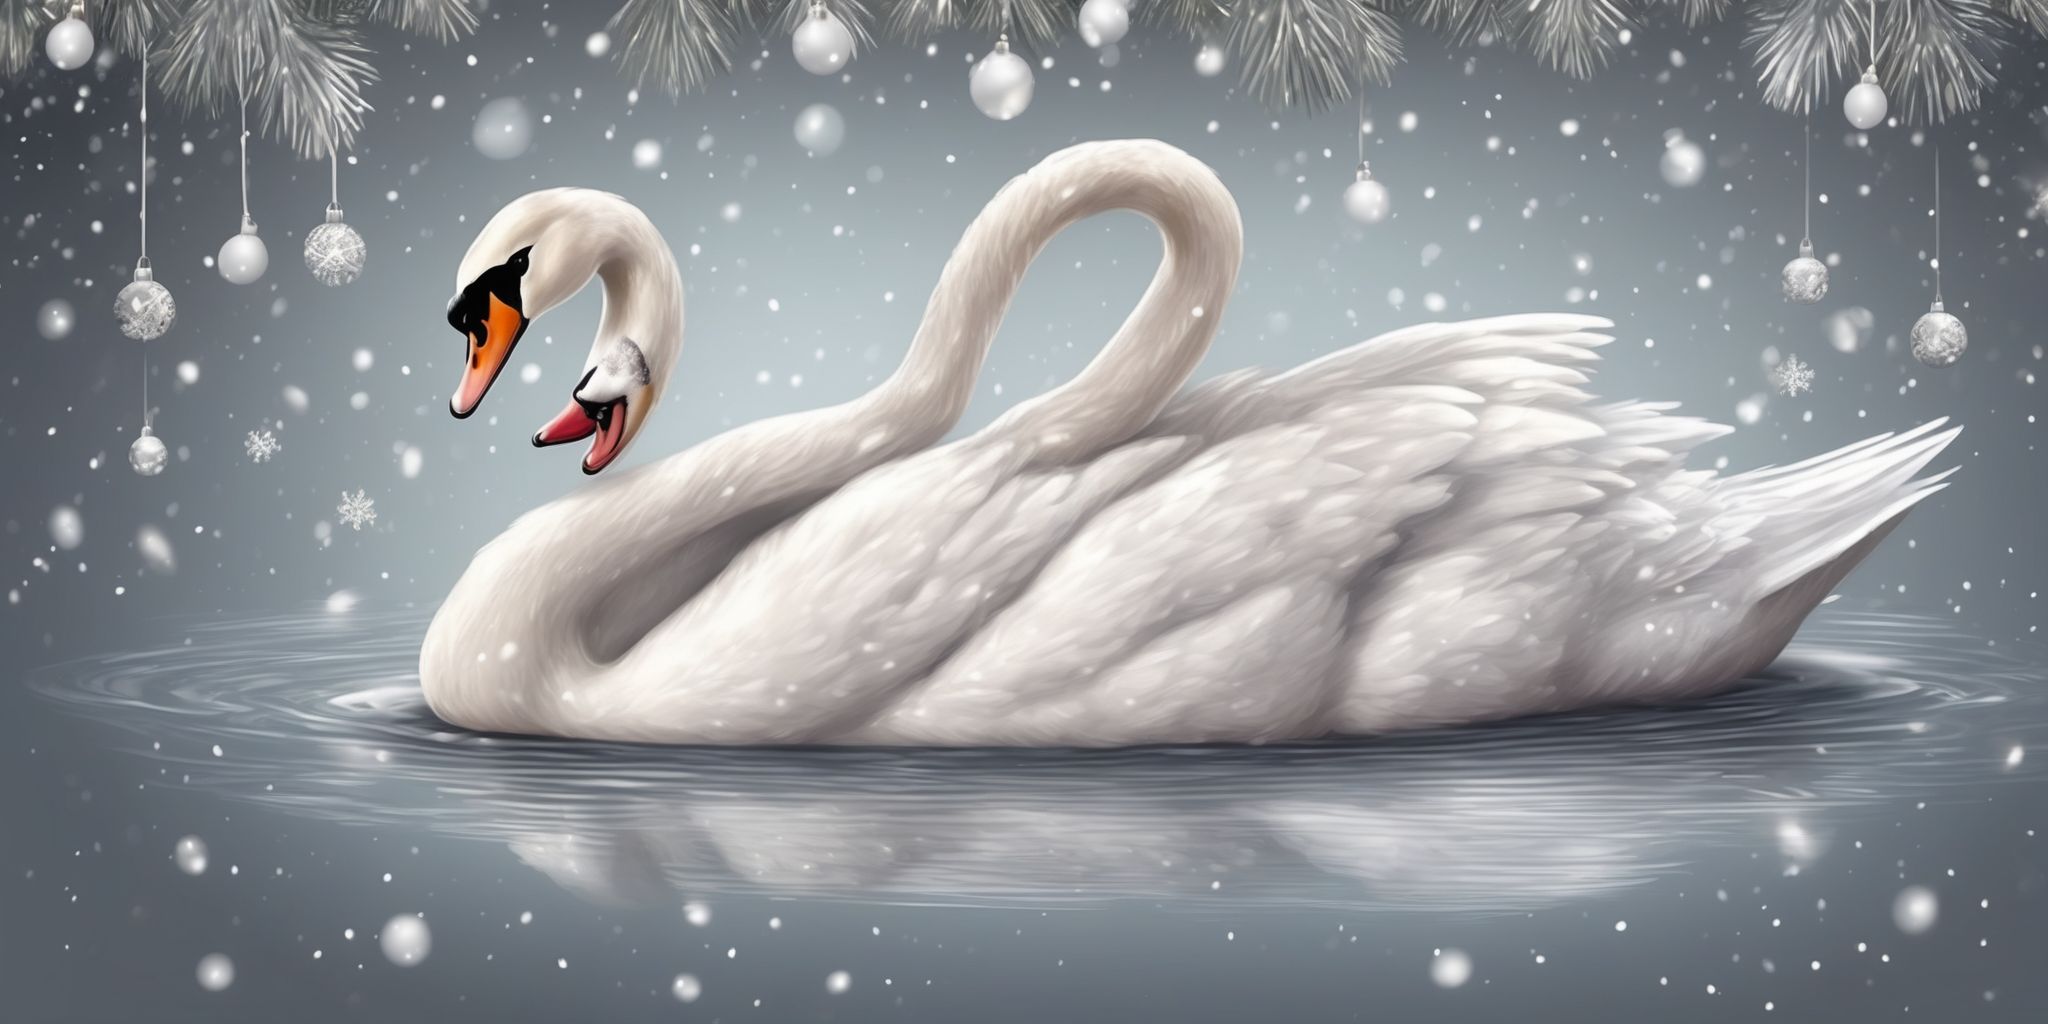 Swan in realistic Christmas style